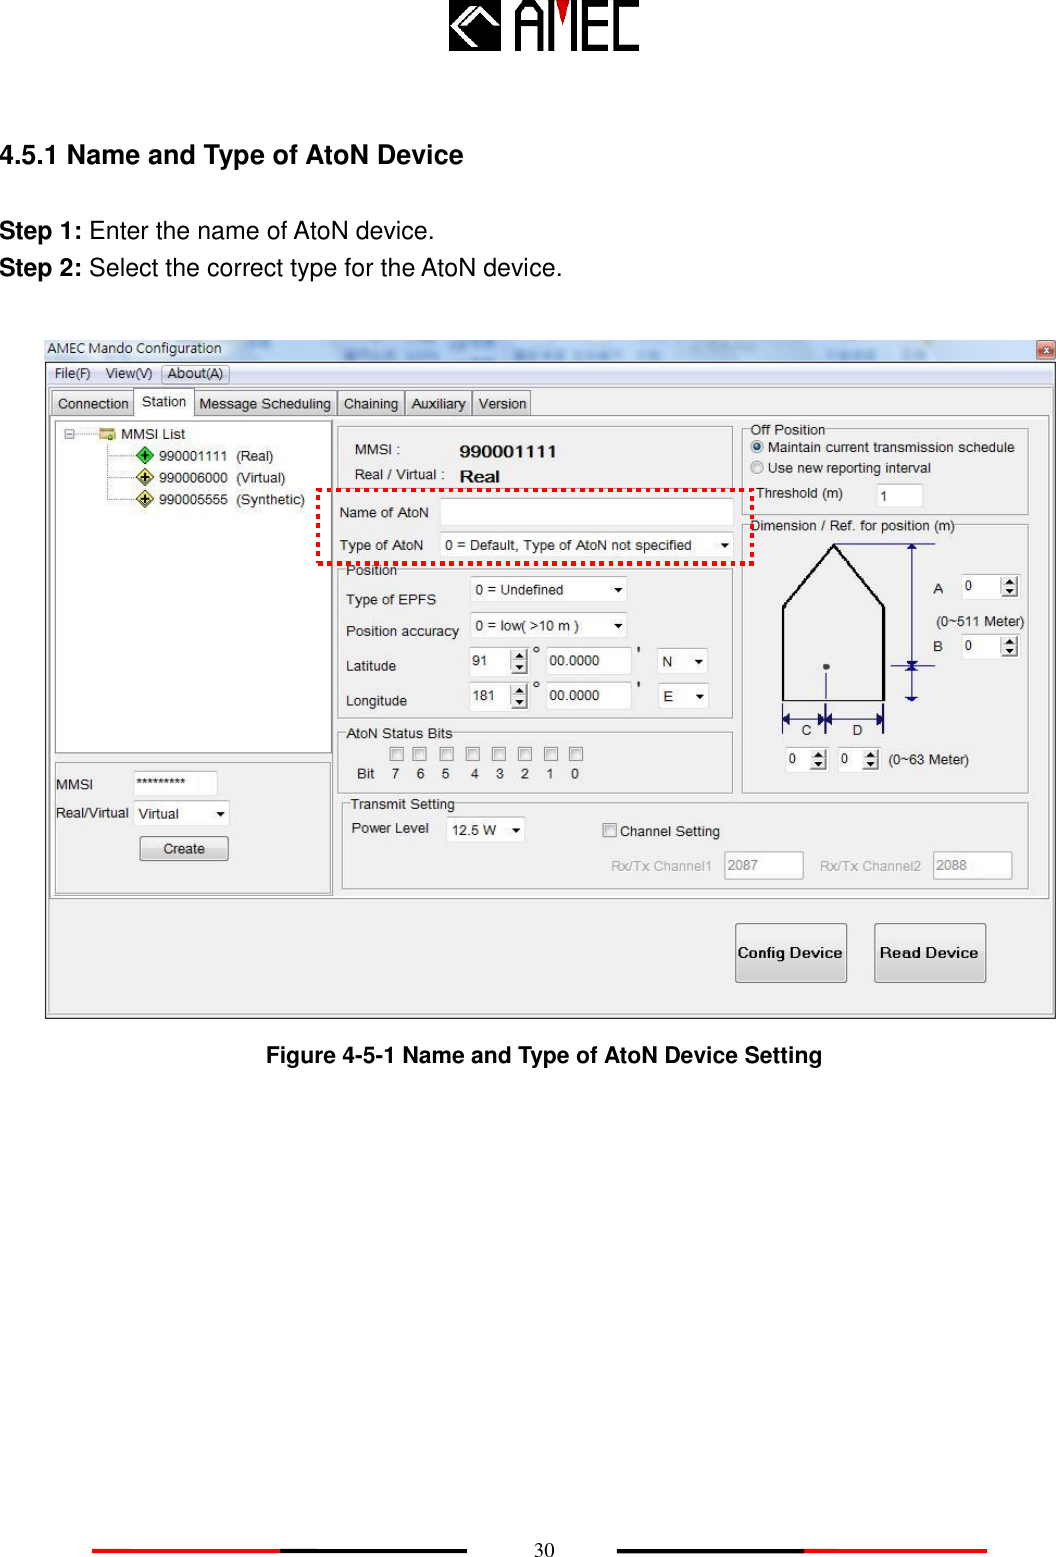    30  4.5.1 Name and Type of AtoN Device  Step 1: Enter the name of AtoN device. Step 2: Select the correct type for the AtoN device.     Figure 4-5-1 Name and Type of AtoN Device Setting 